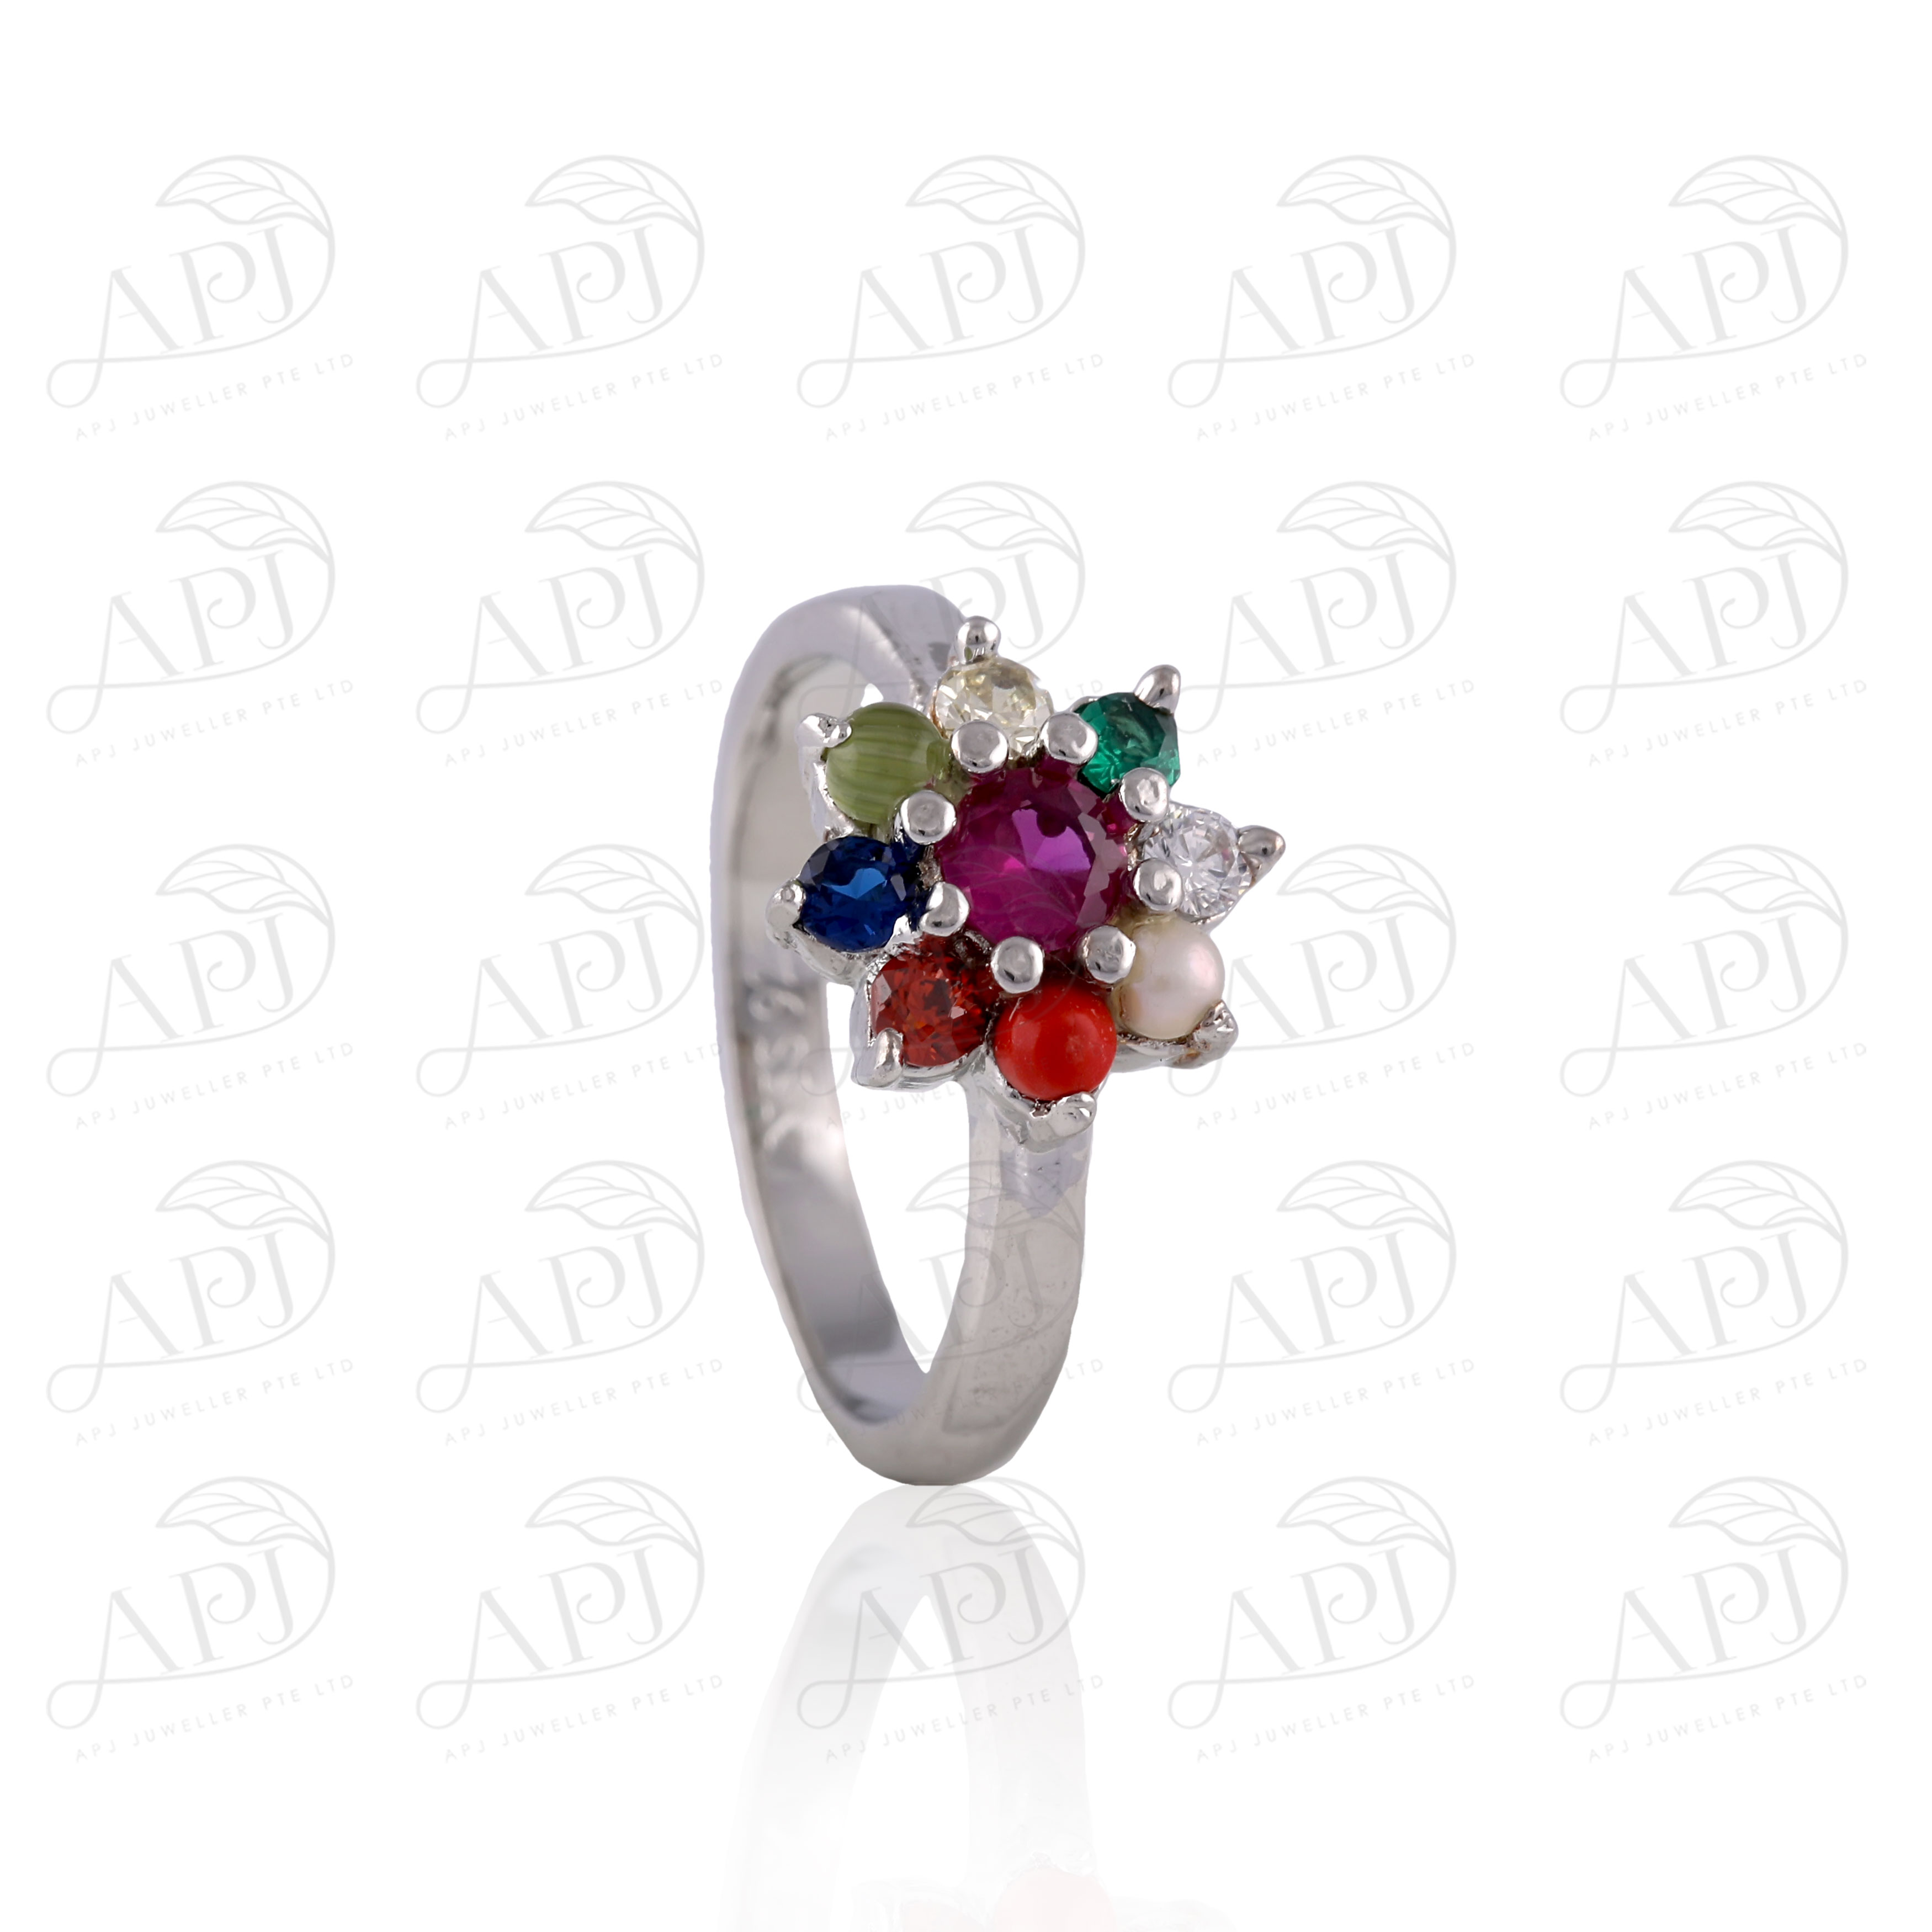 White Round 925 Silver Navratna (9 Gemstone) Ring for Astrological Purpose  at Rs 1420/piece in Jaipur